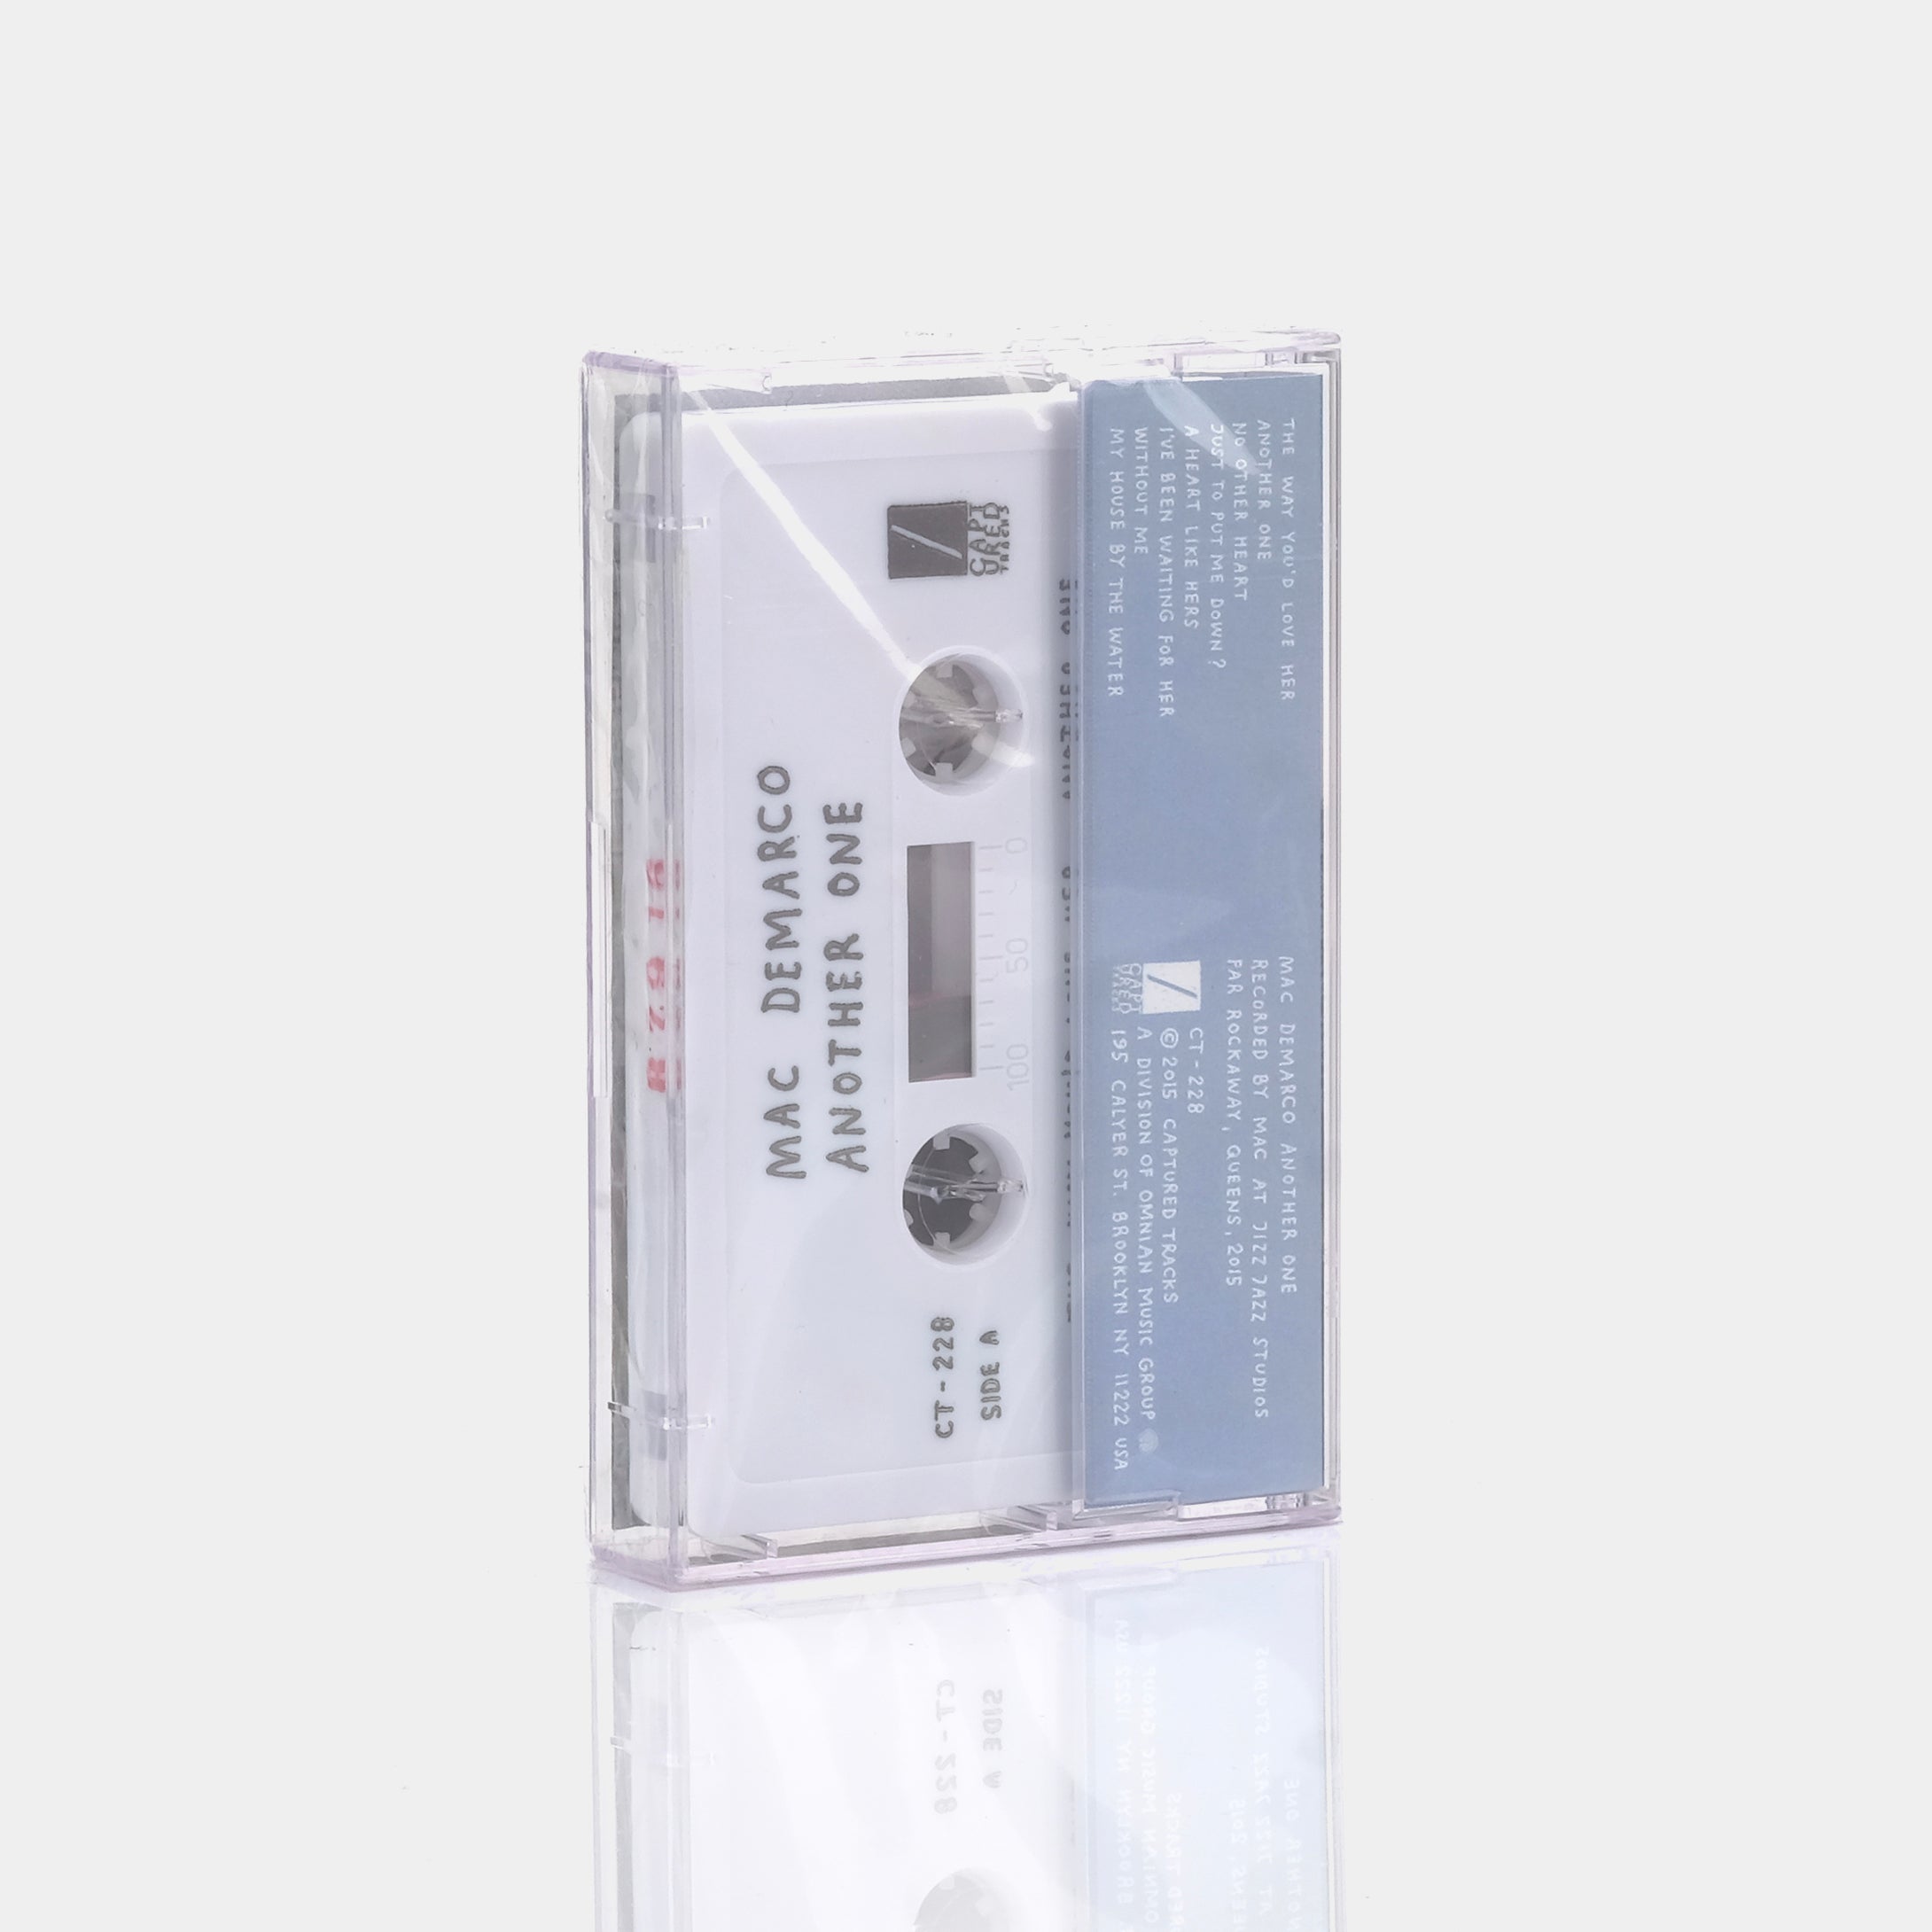 Mac Demarco - Another One Cassette Tape